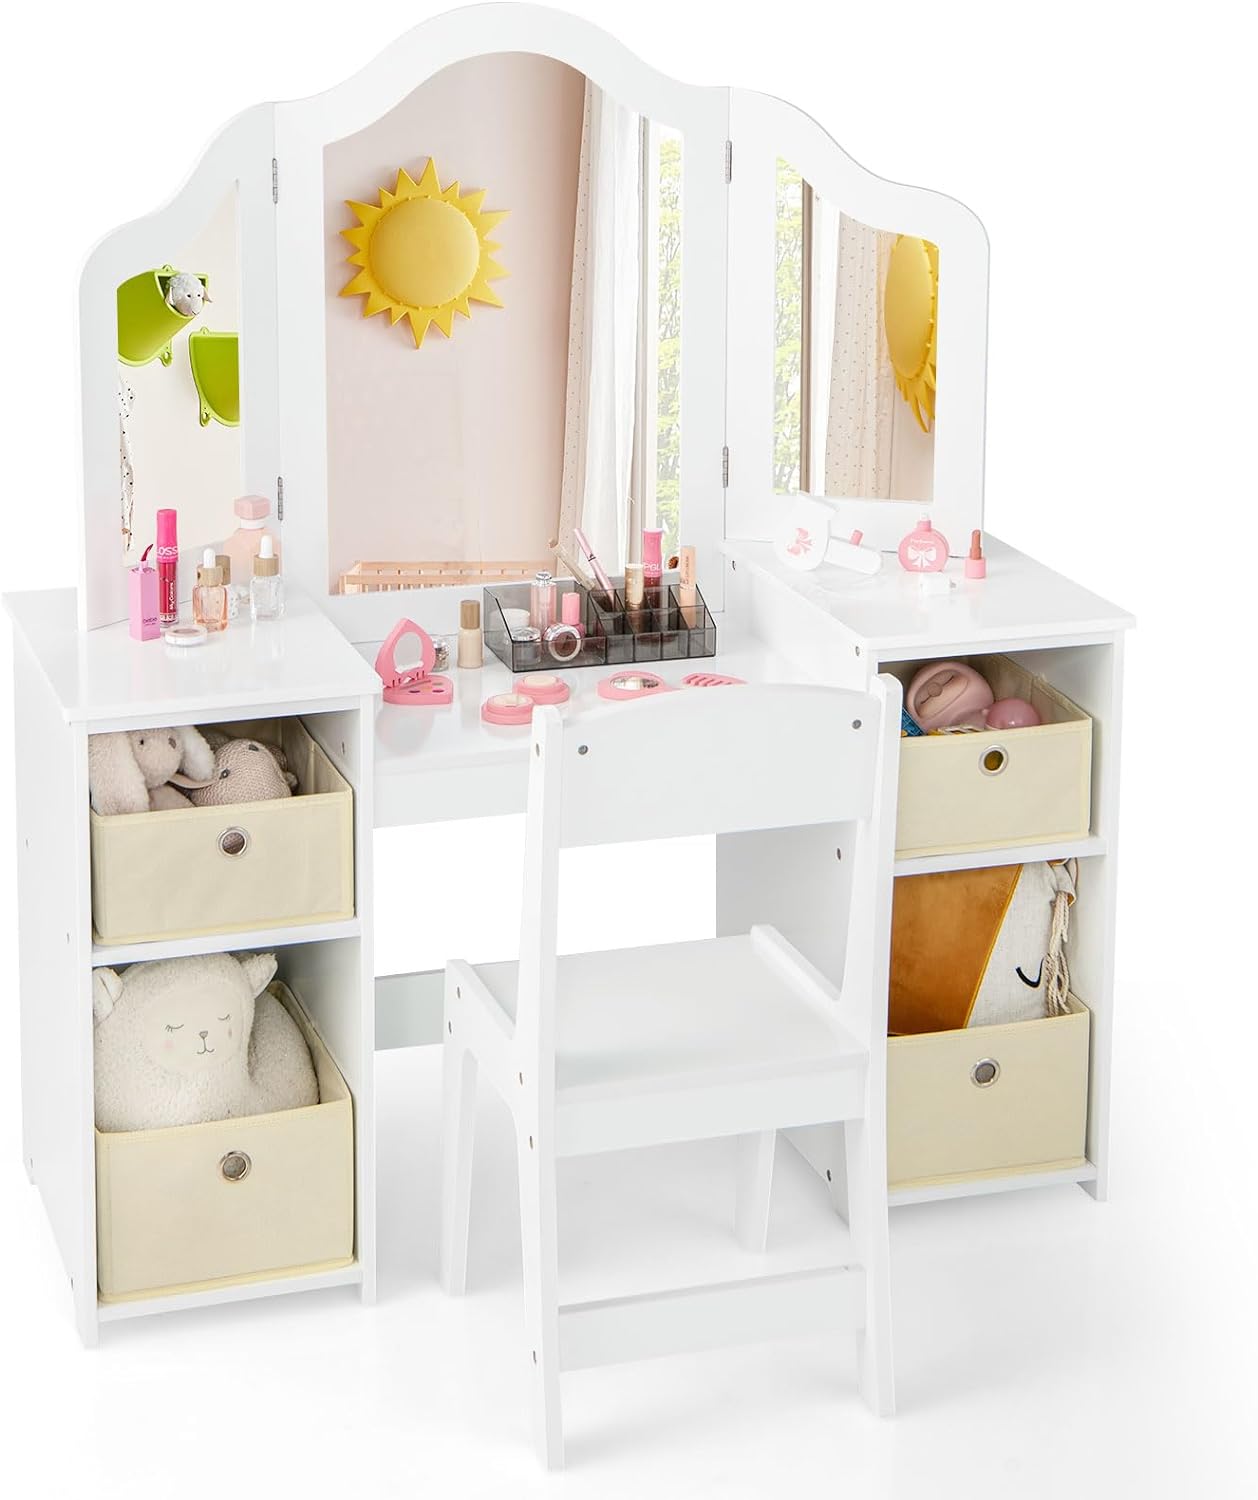 TJCGDTY Vanity Set with Lighted Mirror 2 in 1 Princess Toddler Dressing ...